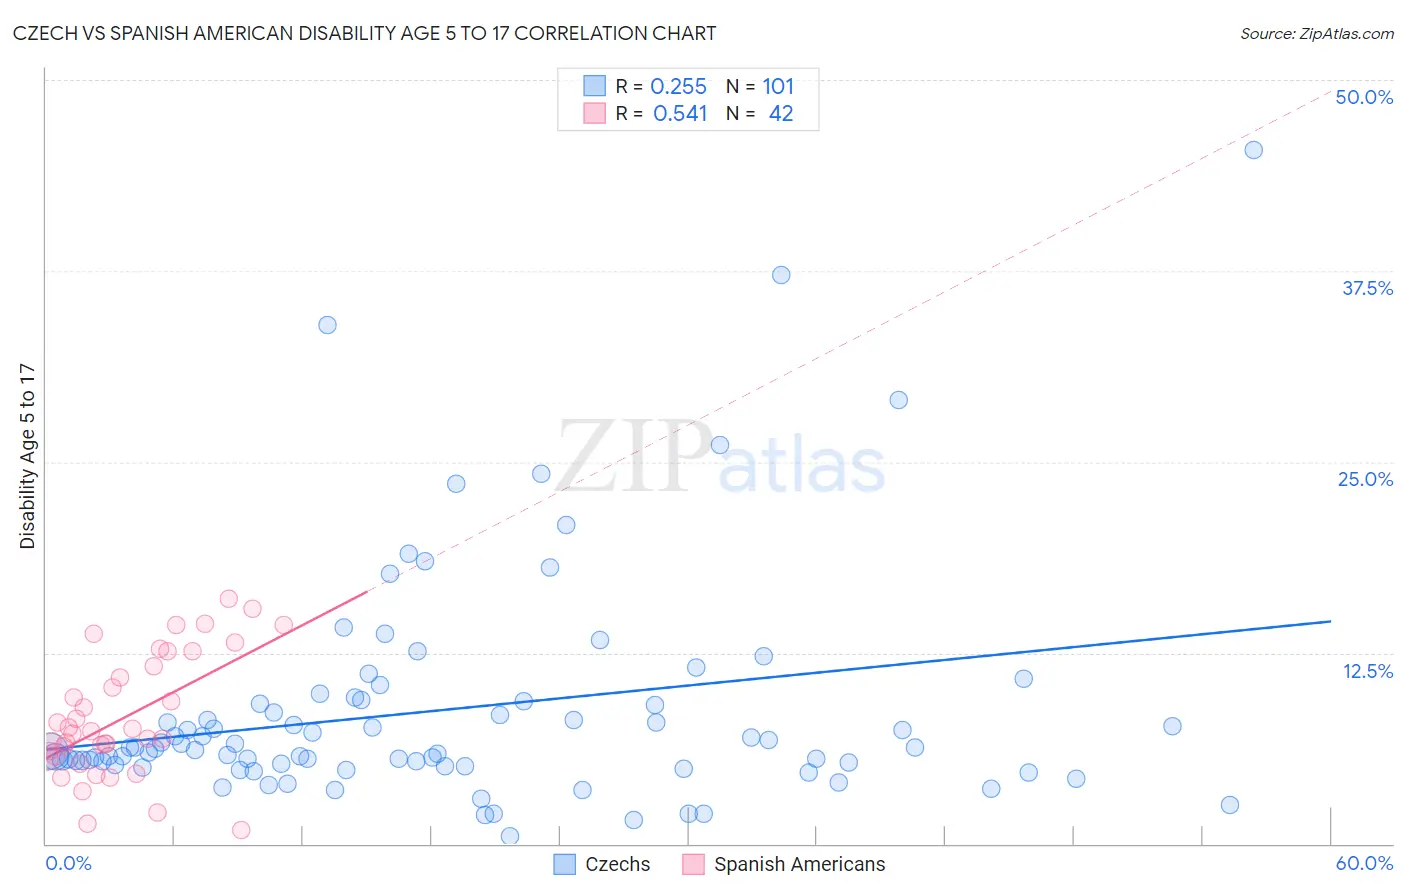 Czech vs Spanish American Disability Age 5 to 17